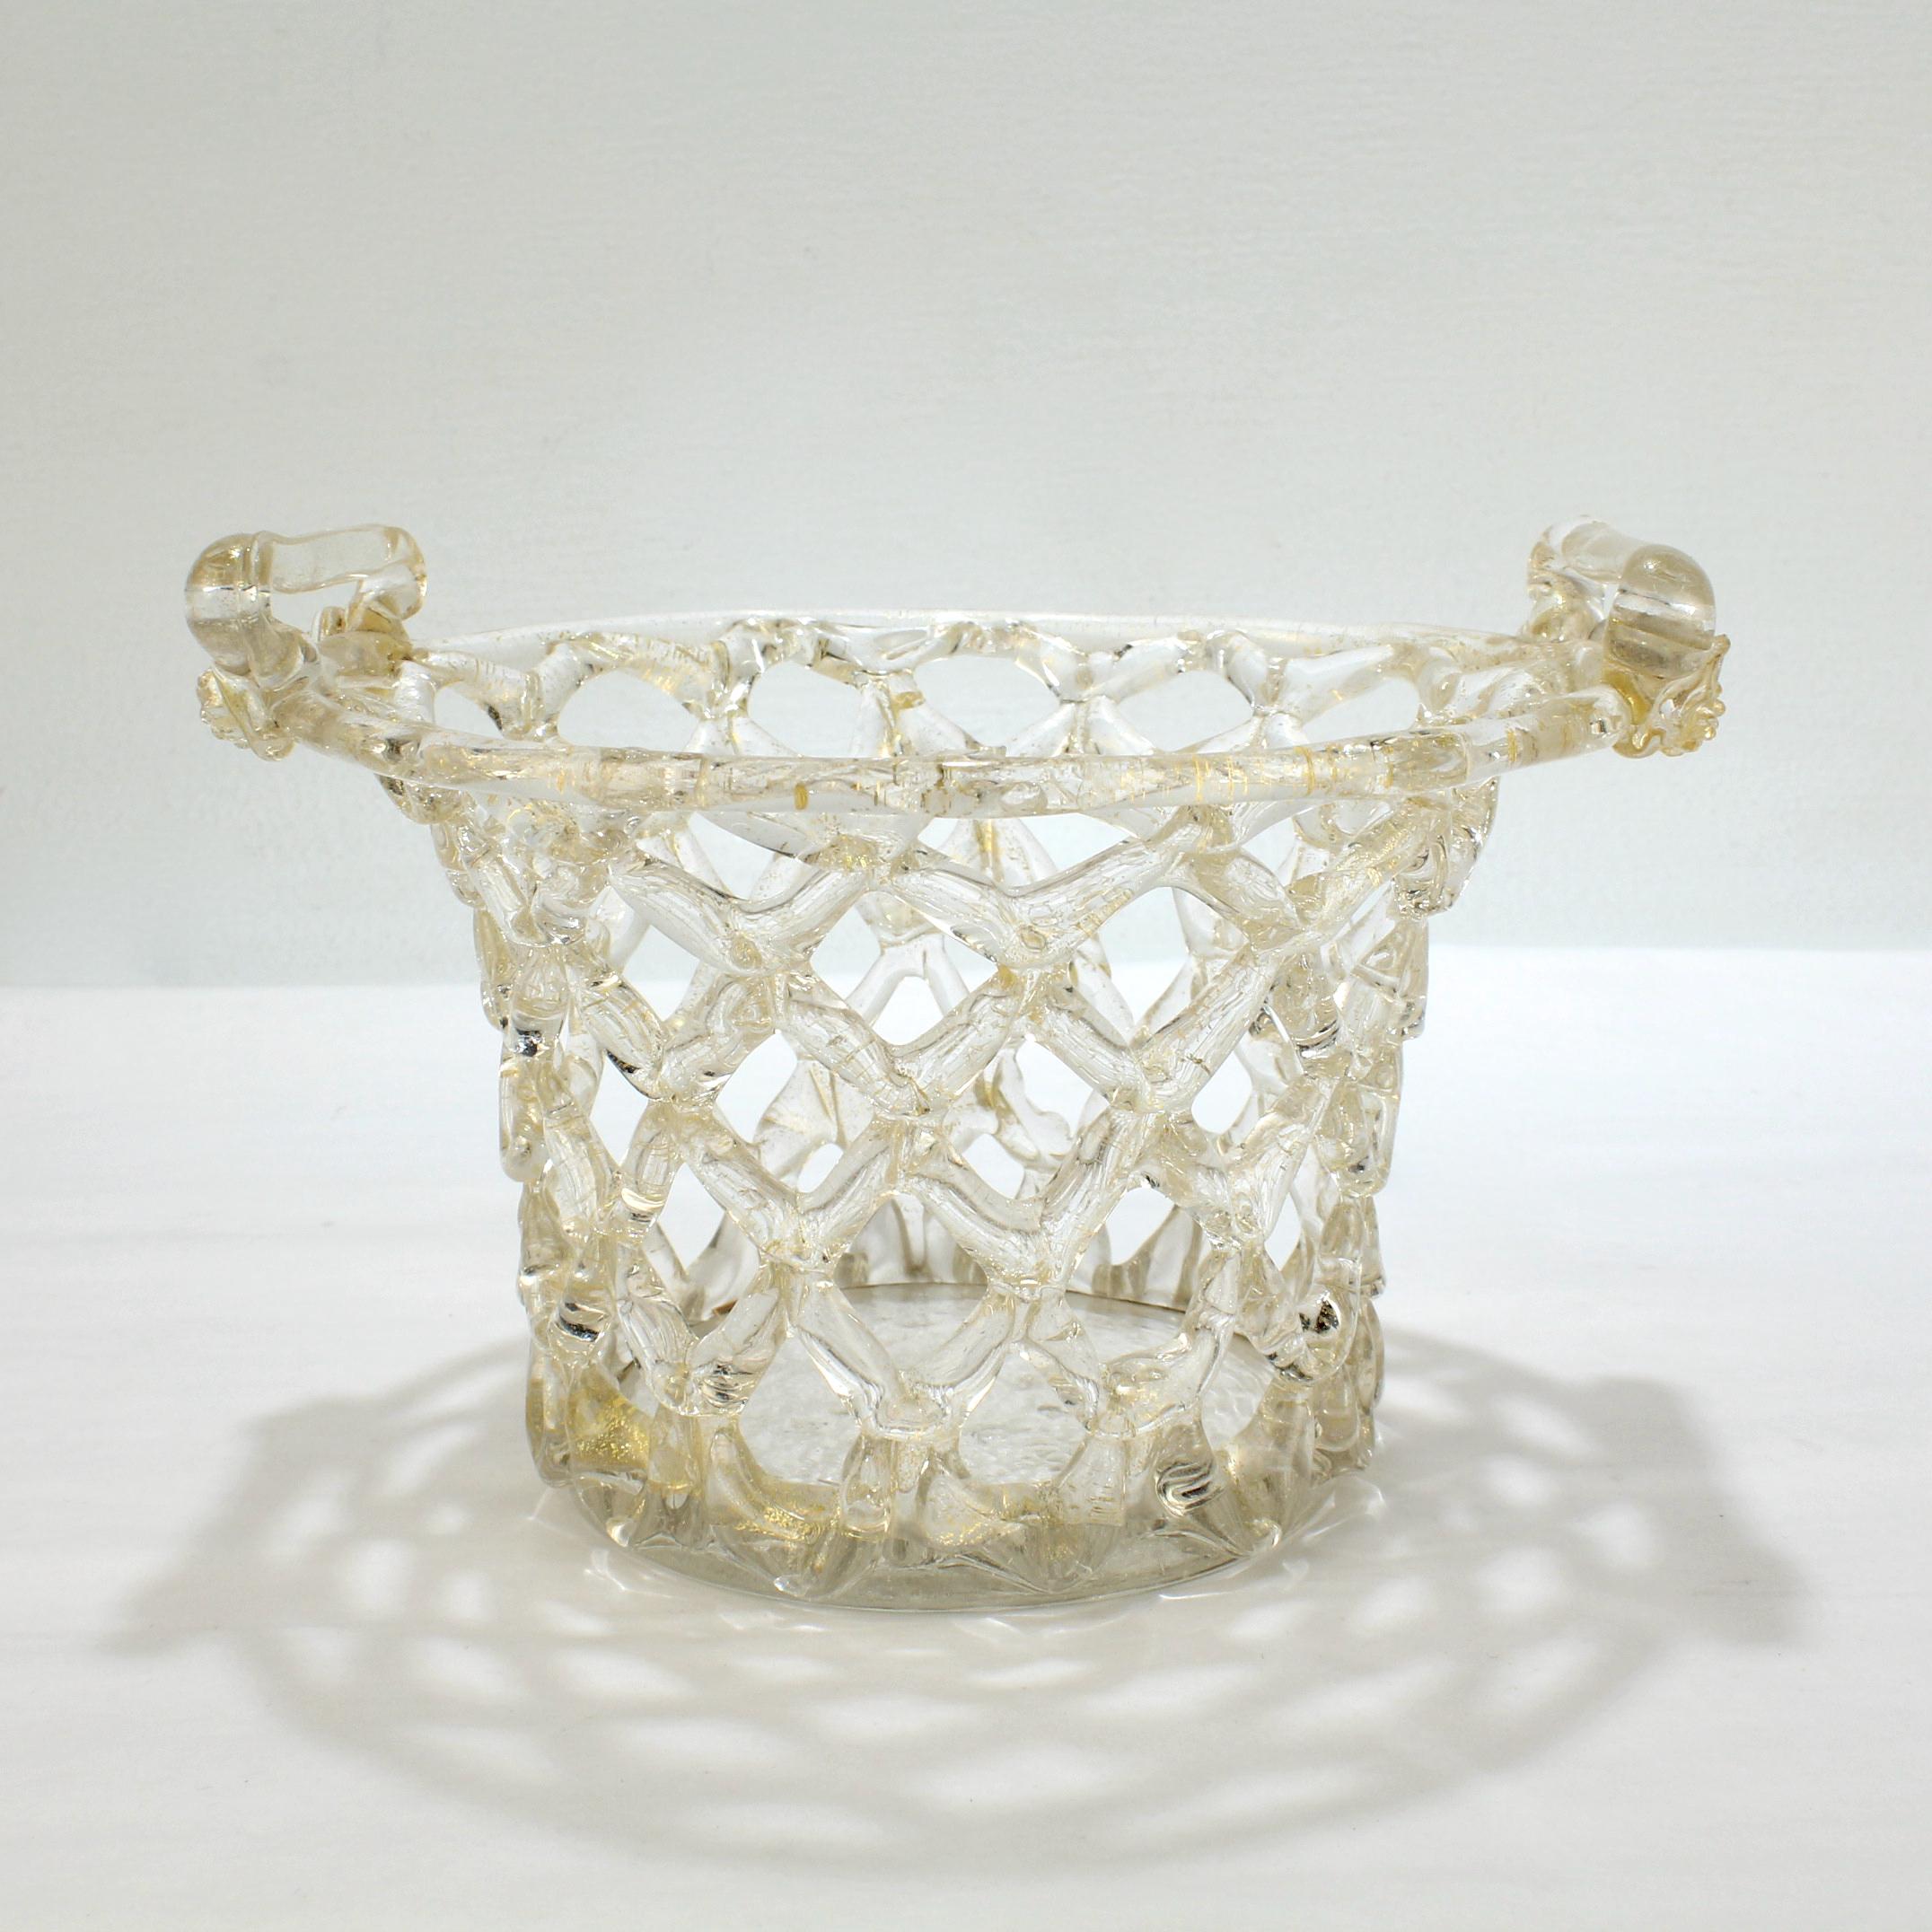 A very fine Venetian glass 'Liege a Traforato' bowl or basket.

In clear glass with gold foil inclusions, loop handles with applied button prunts, and a wafer foot. 

Simply an amazing openwork basket!

Provenance: 
From the estate of